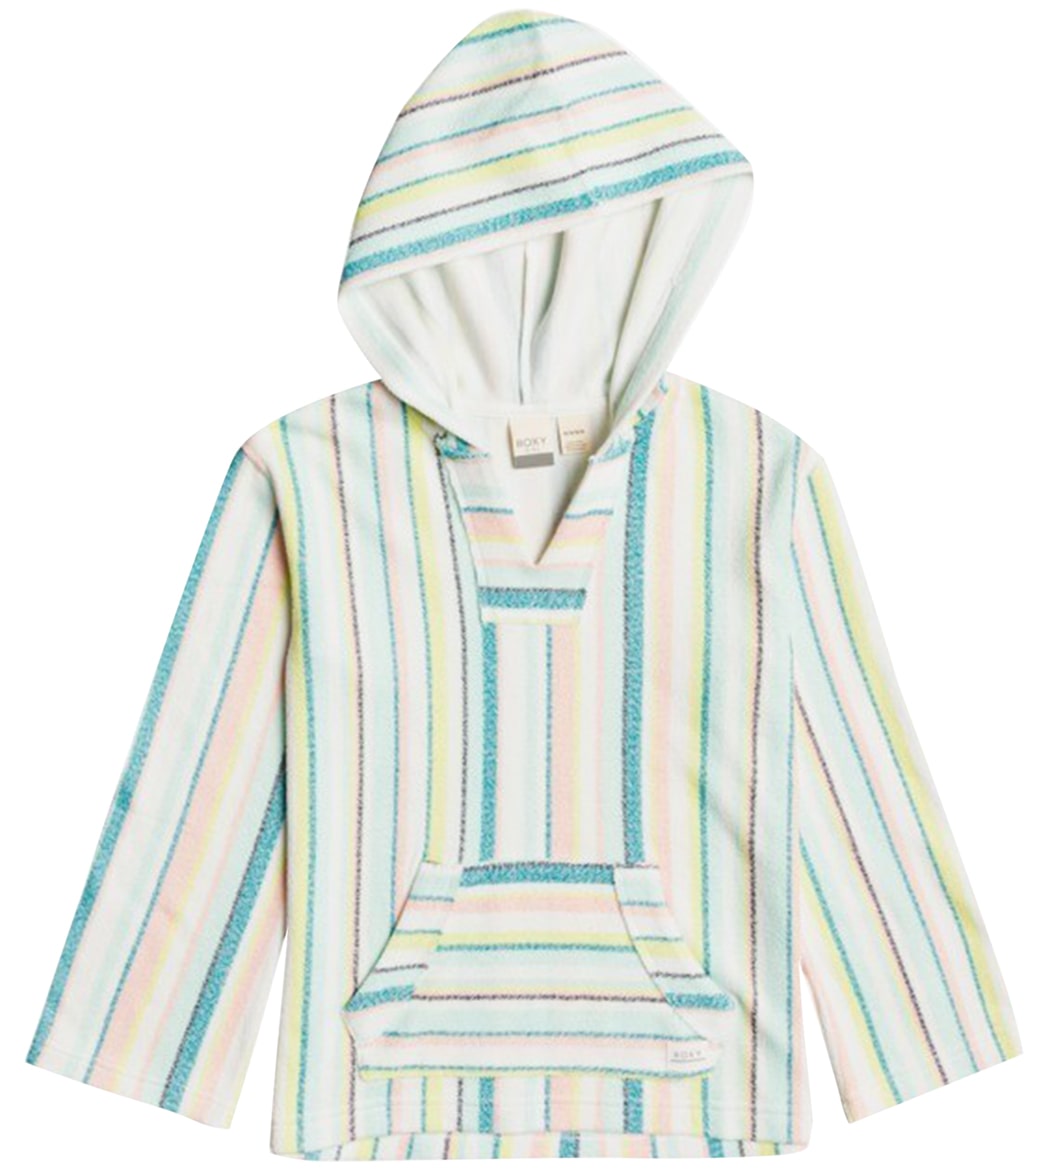 Roxy Girls' Catch Up Love Stripe Hooded Poncho - Snow White Rg Dreaming Stripe 12 Big Kid Cotton/Polyester - Swimoutlet.com